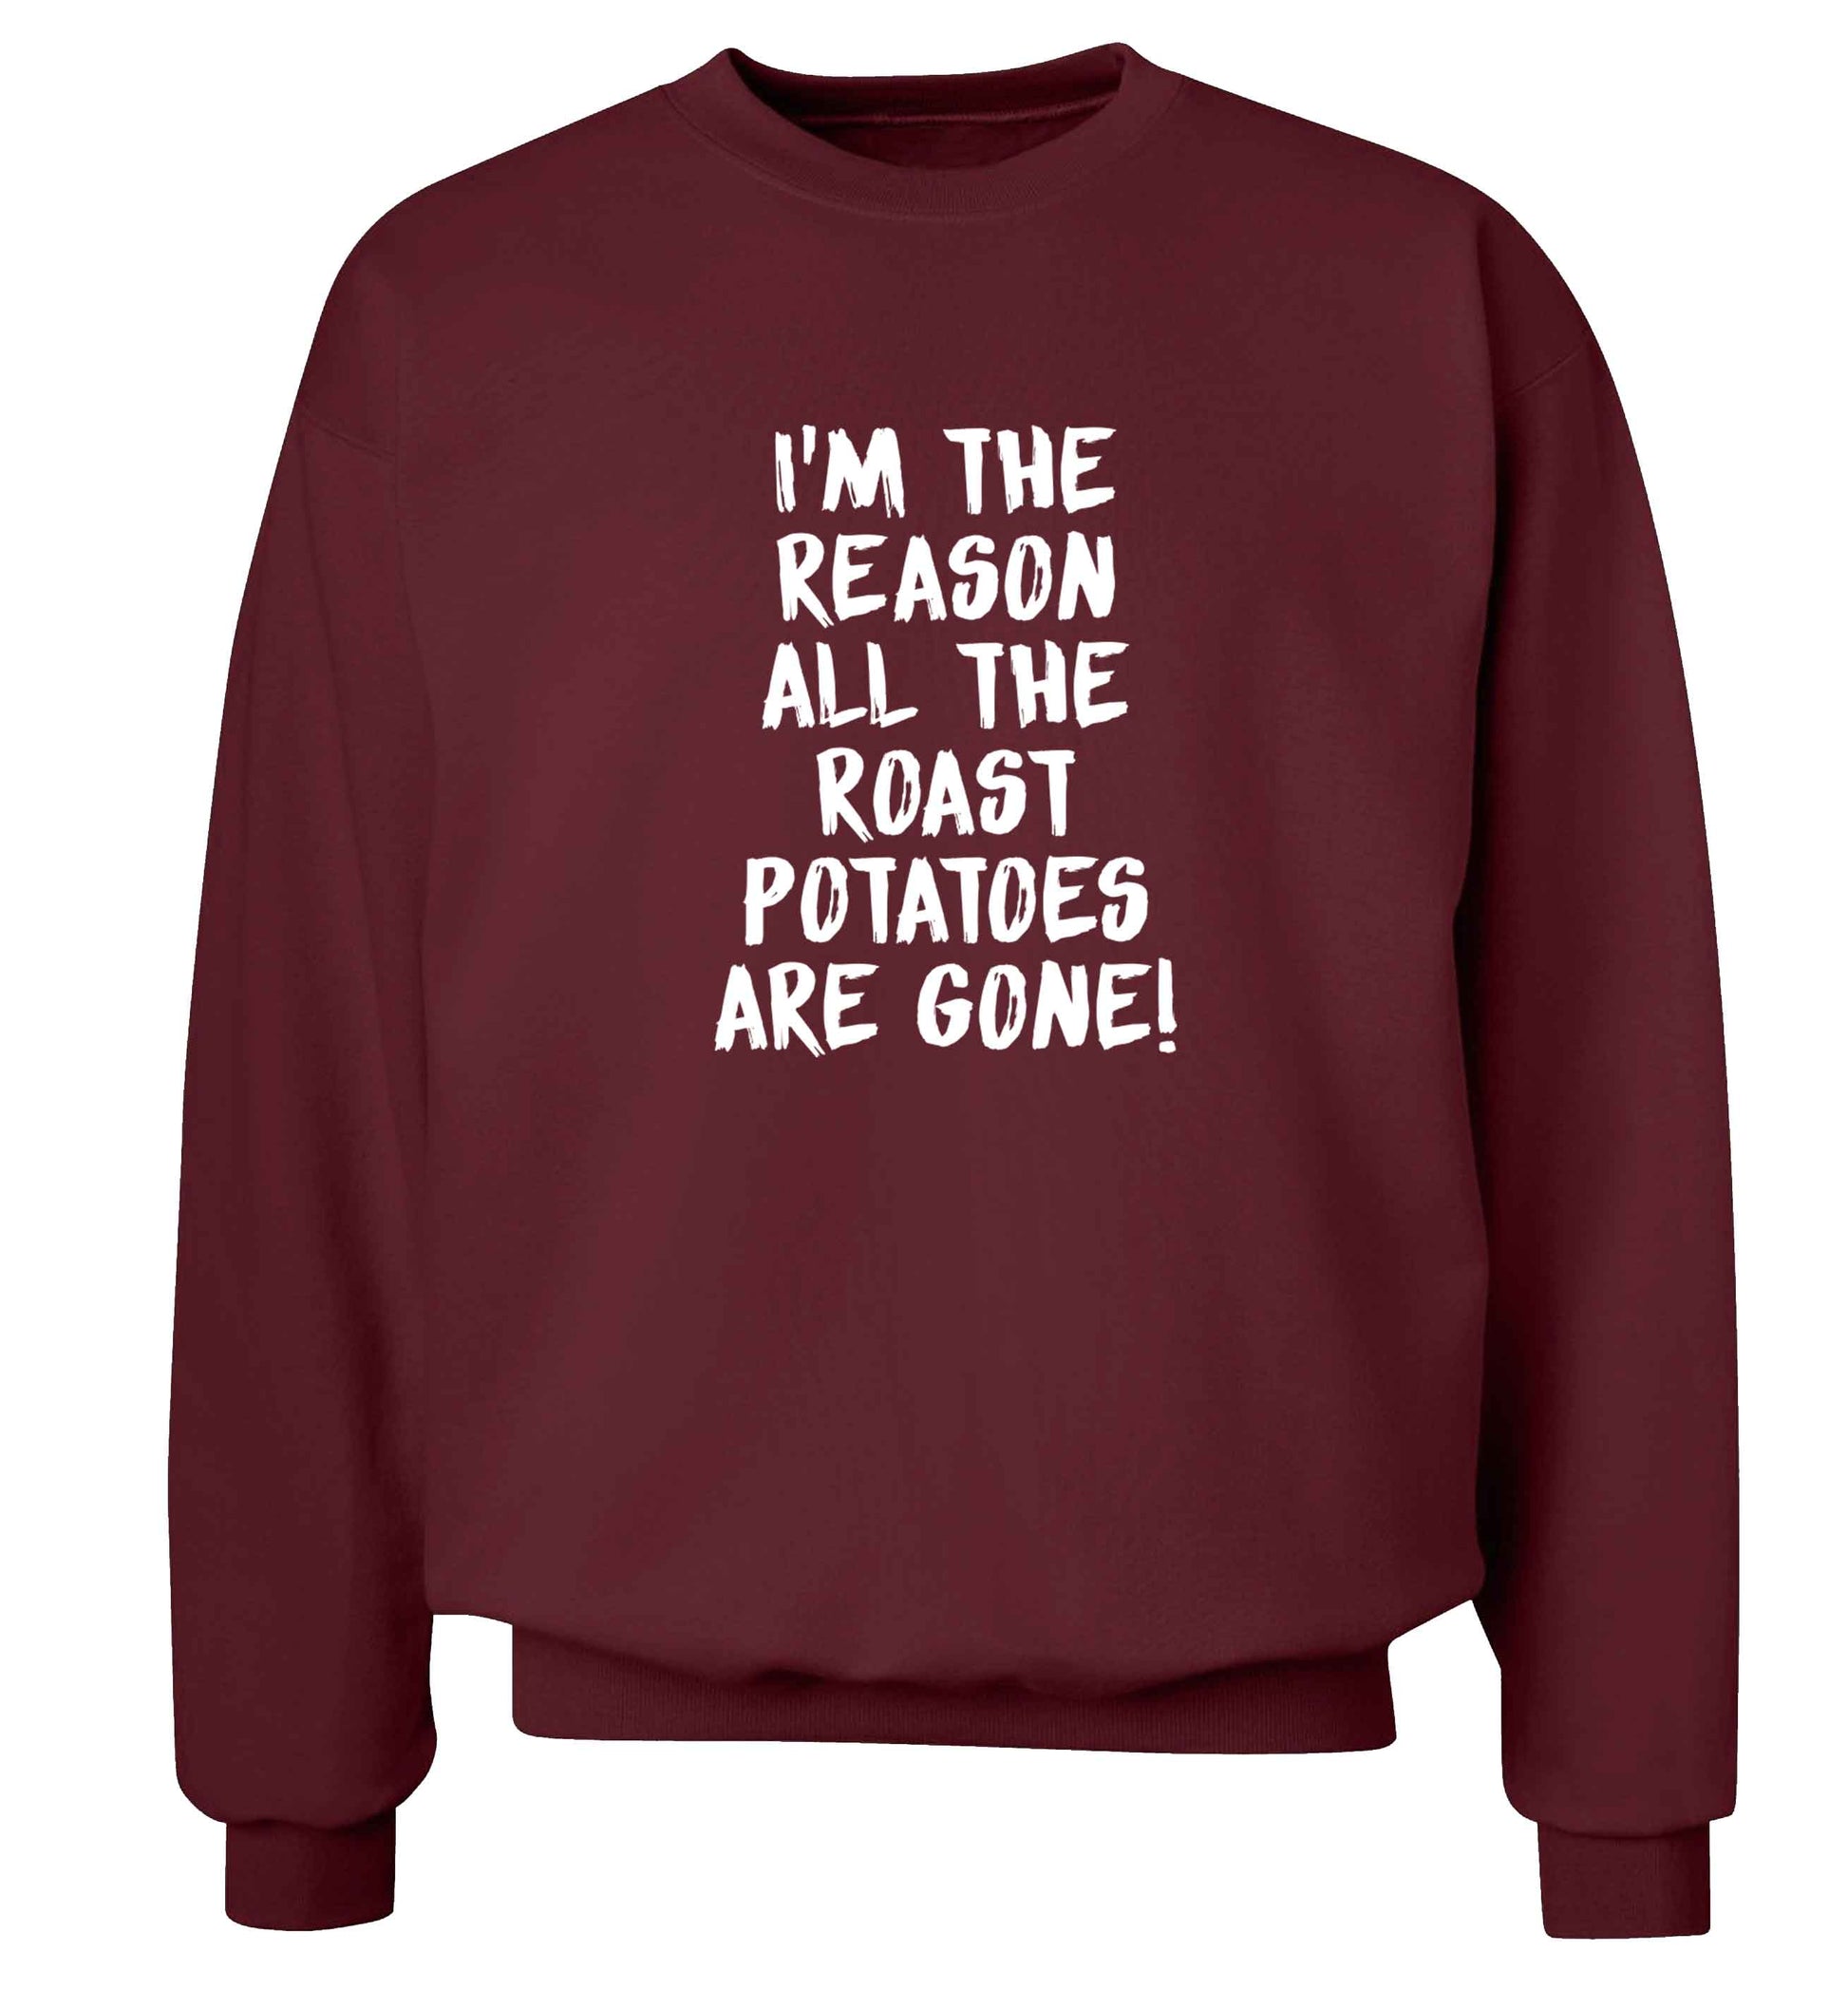 I'm the reason all the roast potatoes are gone adult's unisex maroon sweater 2XL